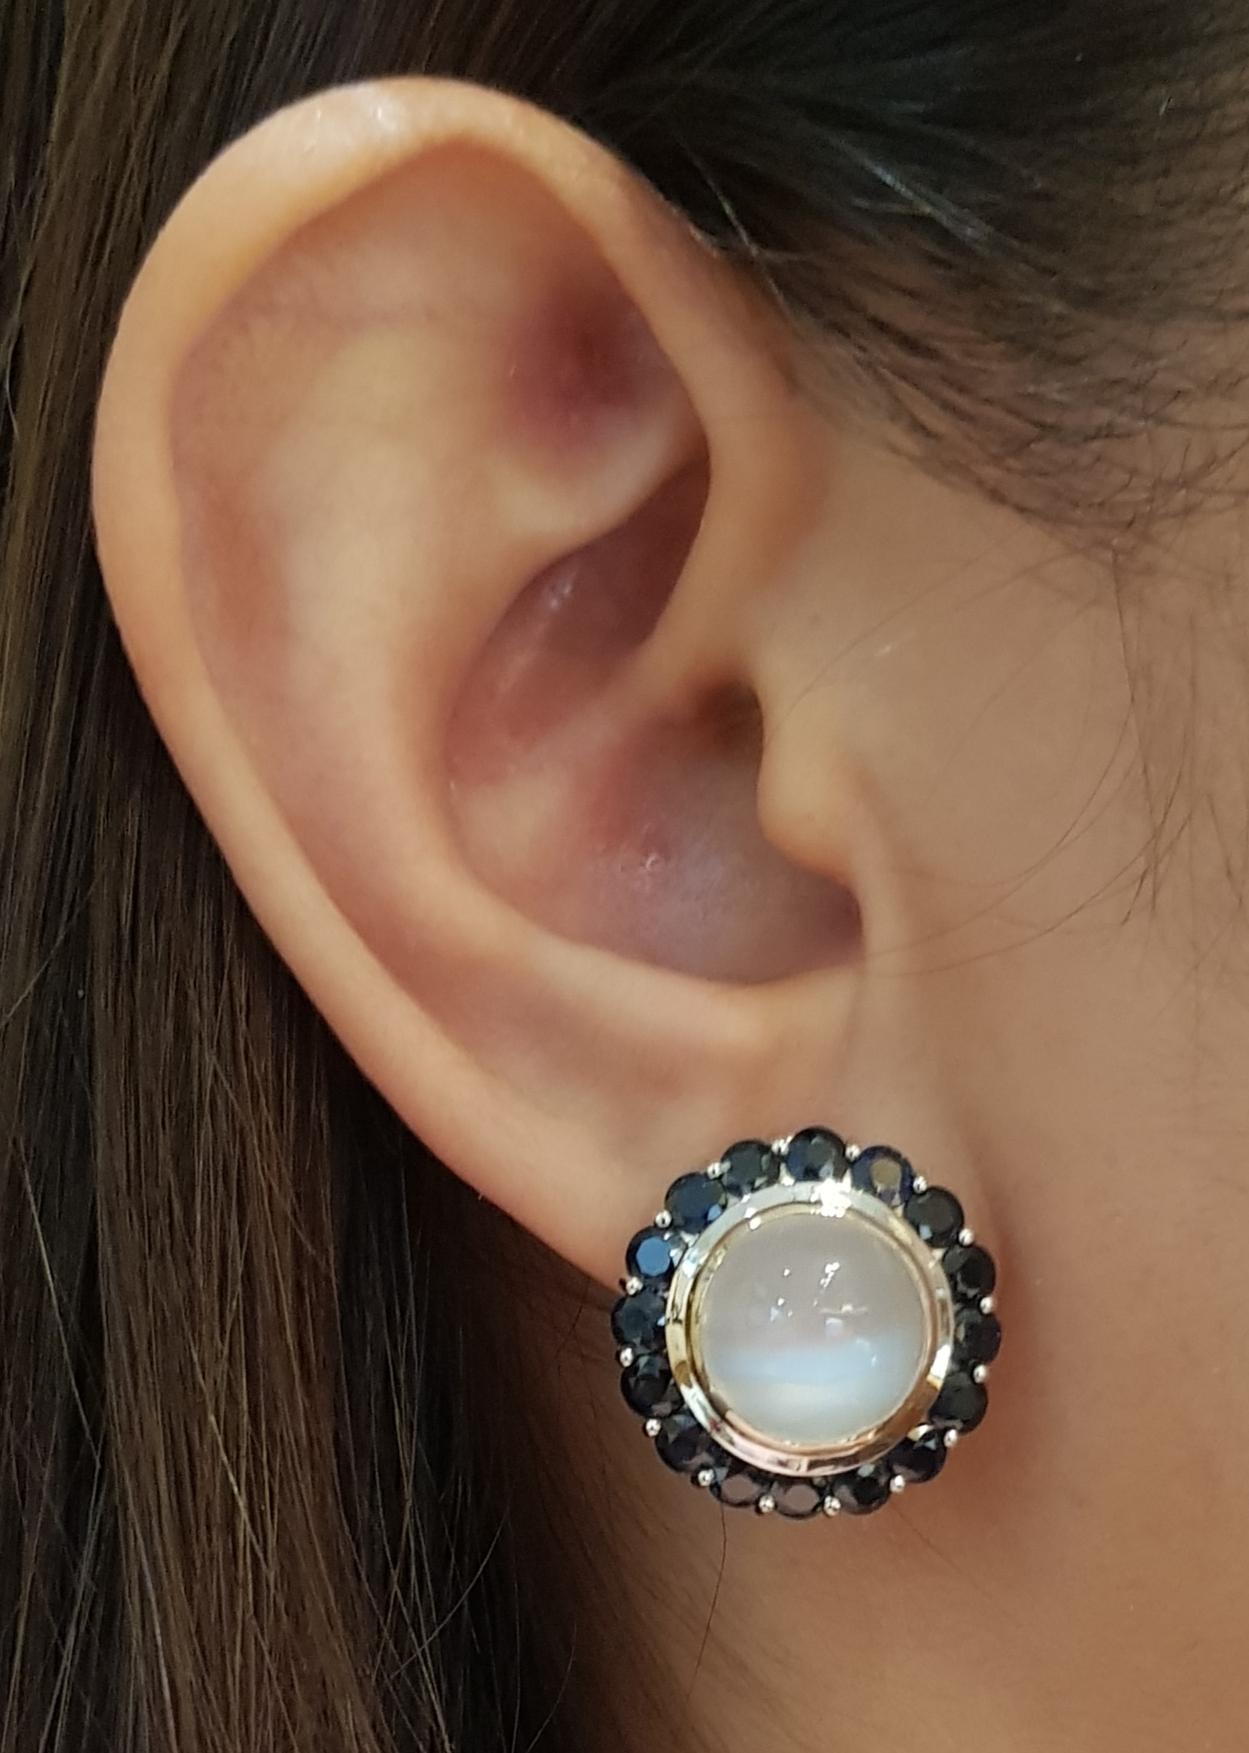 Moonstone 13.11 carats with Blue Sapphire 4.81 carats Earrings set in 14 Karat White Gold Settings

Width: 2.0 cm 
Length: 2.0 cm
Total Weight: 13.84 grams

